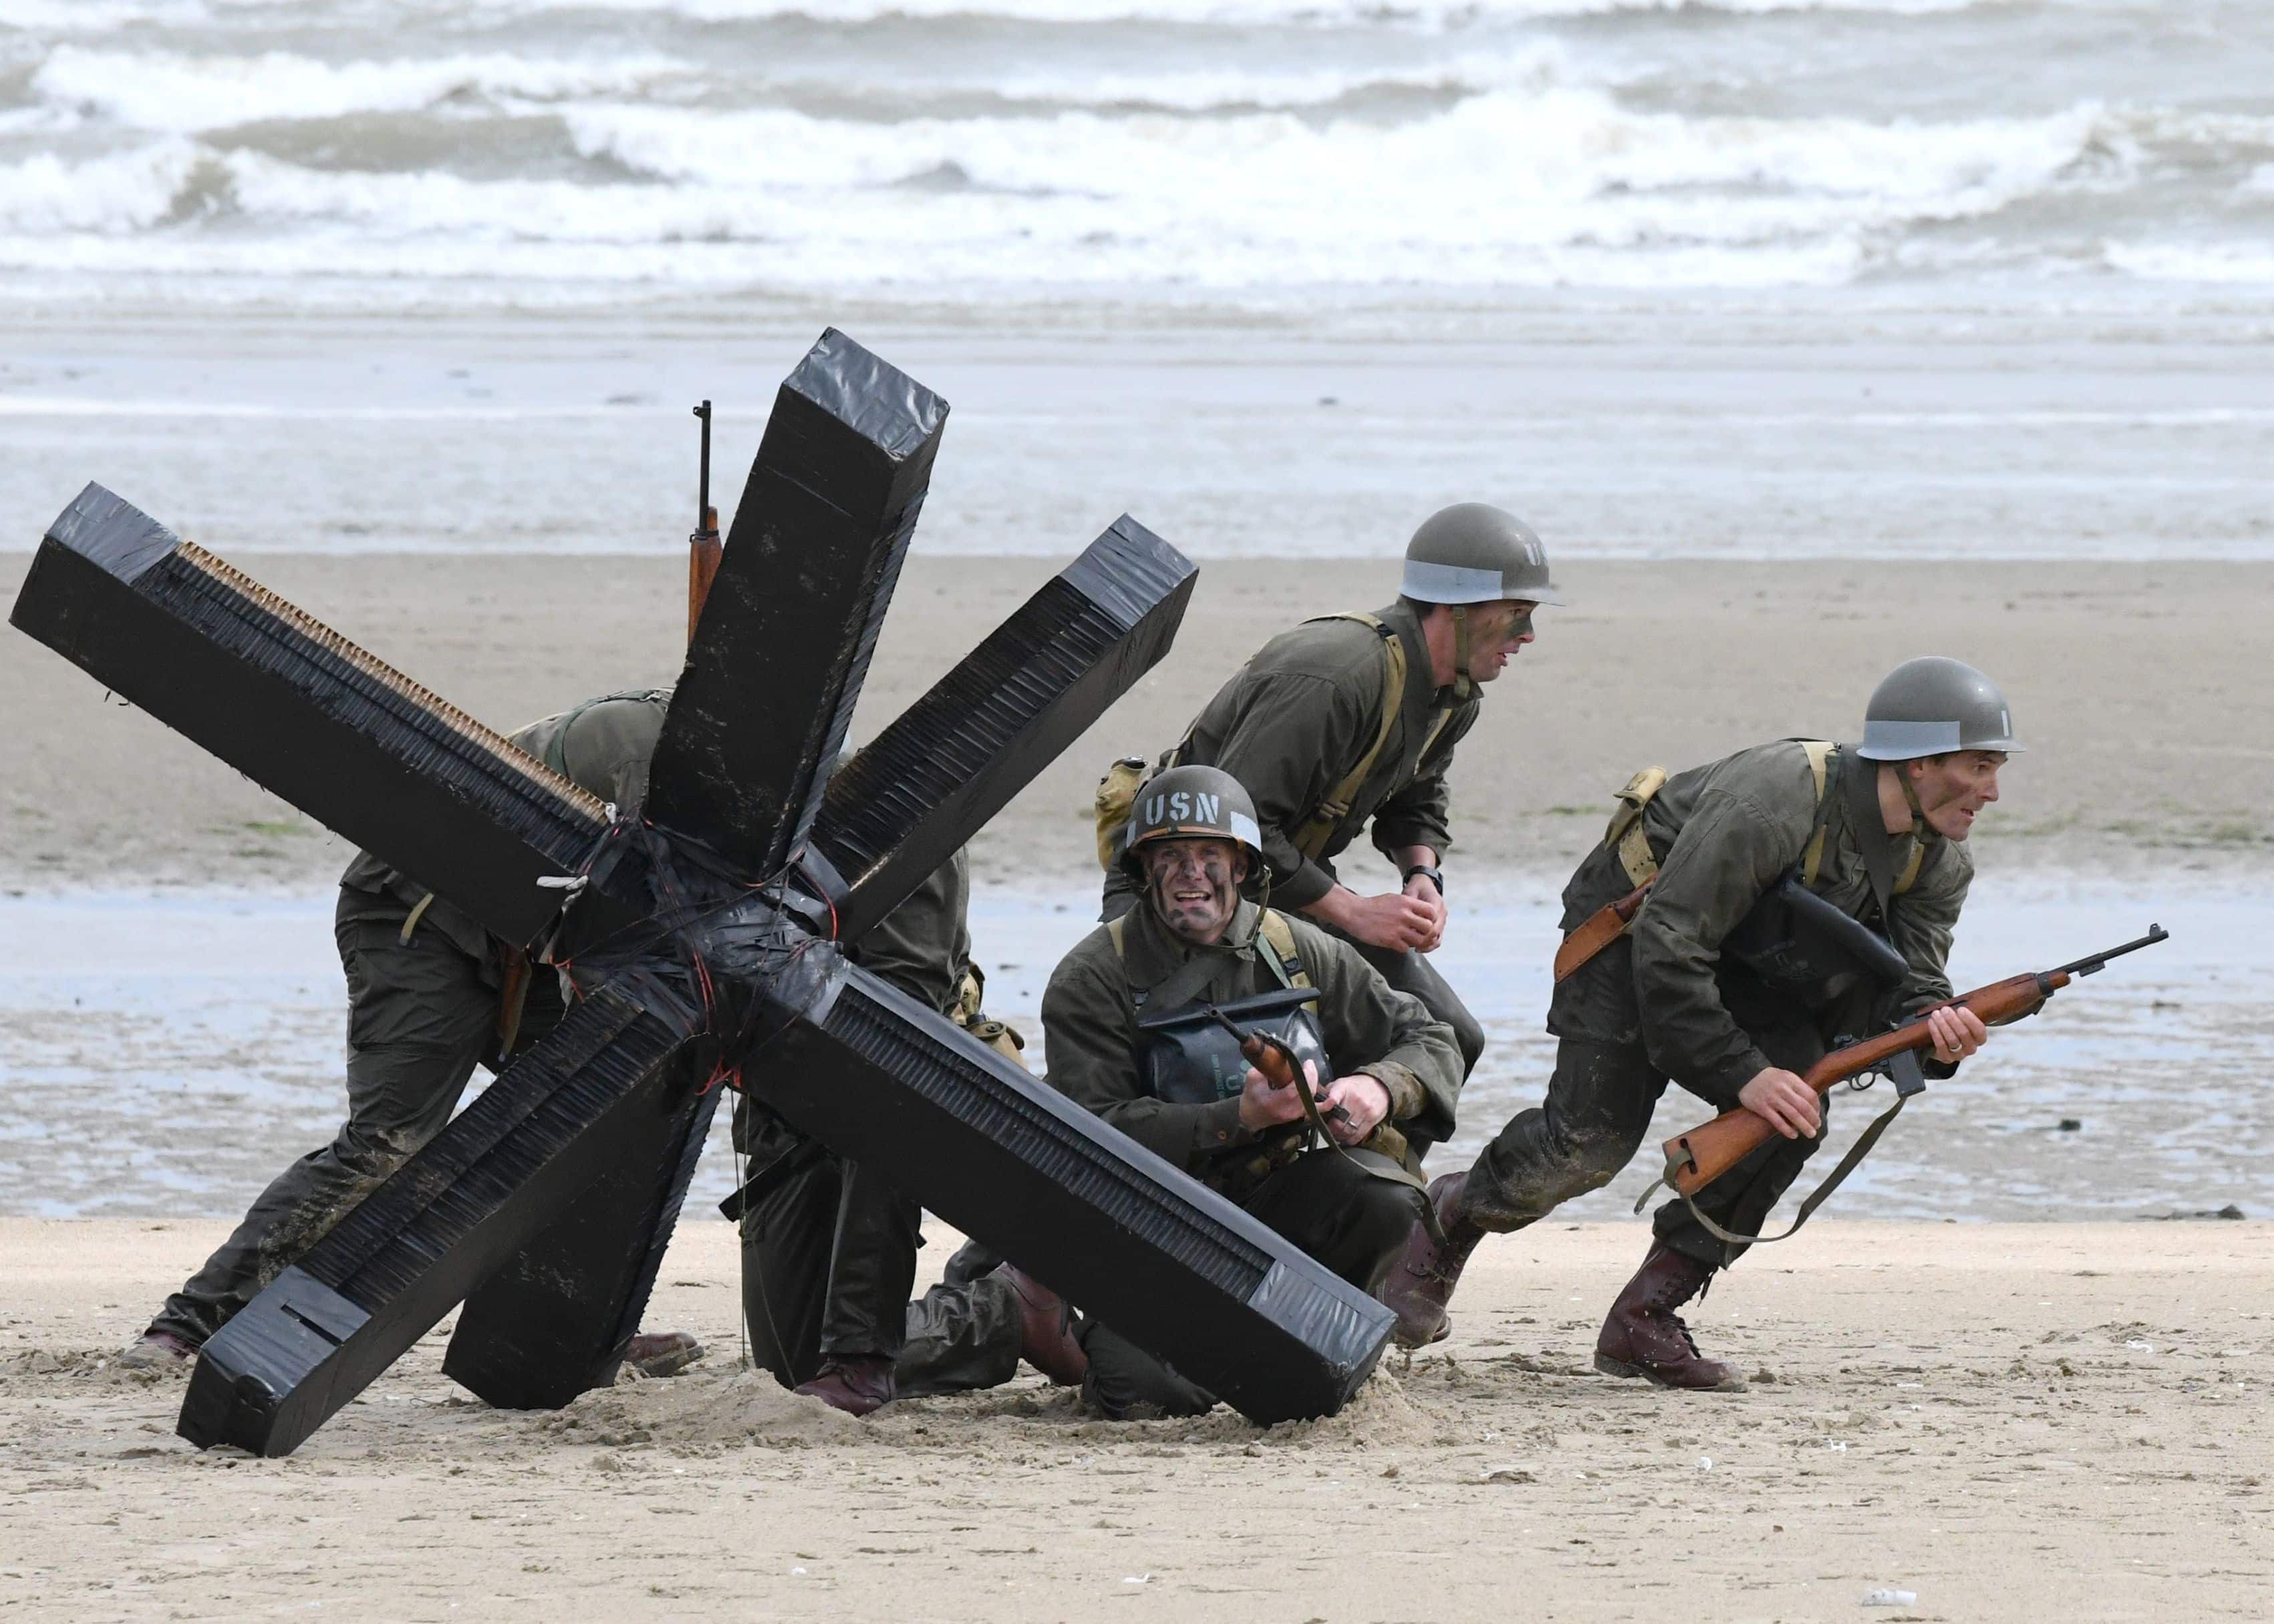 U.S. Navy SEALS assigned to Special Warfare Unit 2 re-enact the D-Day mission Navy Combat Demolition Unit Sailors conducted in the cover of darkness to clear the beaches for the main invading force on Utah Beach, June 7, 2019.